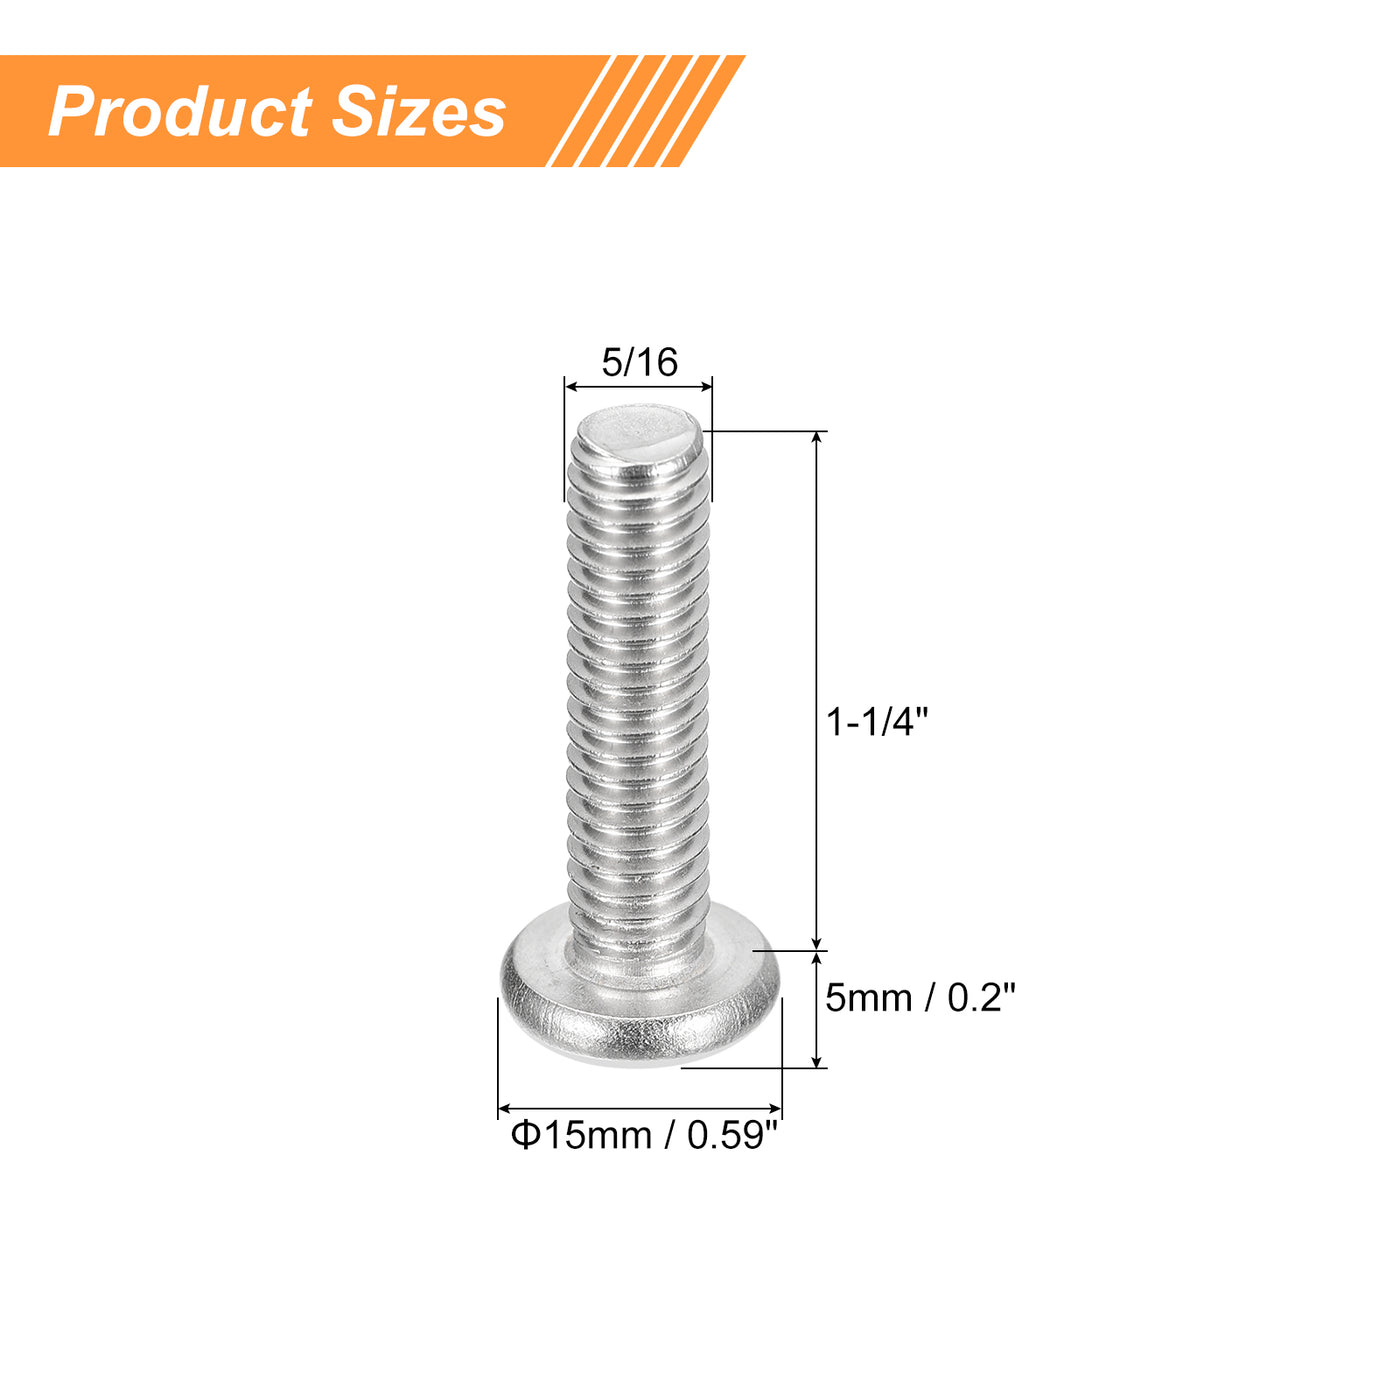 uxcell Uxcell 5/16-18x1-1/4" Pan Head Machine Screws, Stainless Steel 18-8 Screw, Pack of 5